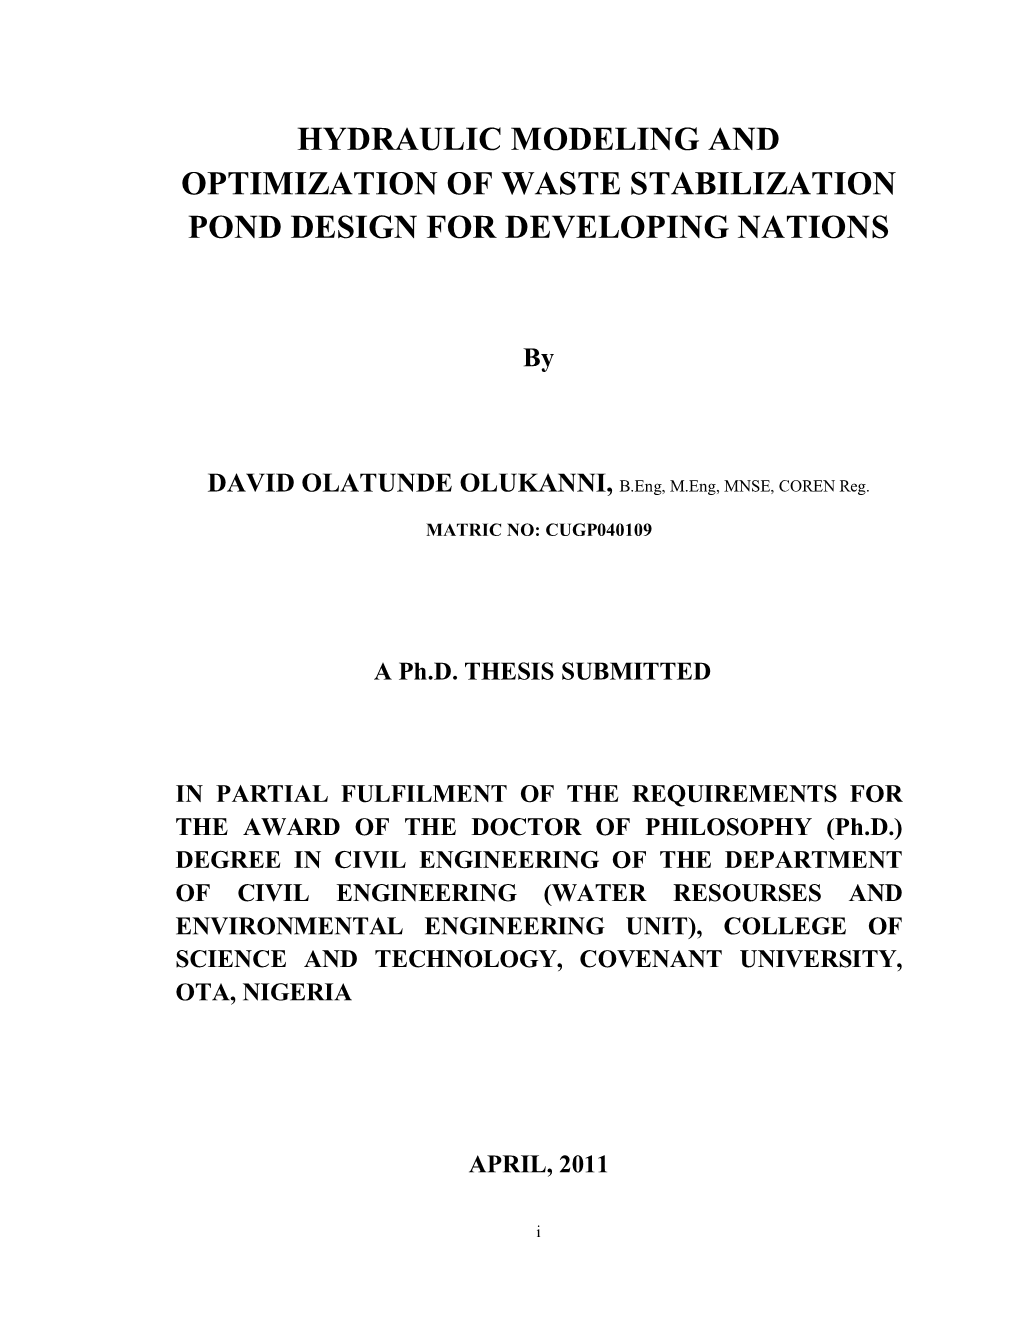 Hydraulic Modeling and Optimization of Waste Stabilization Pond Design for Developing Nations